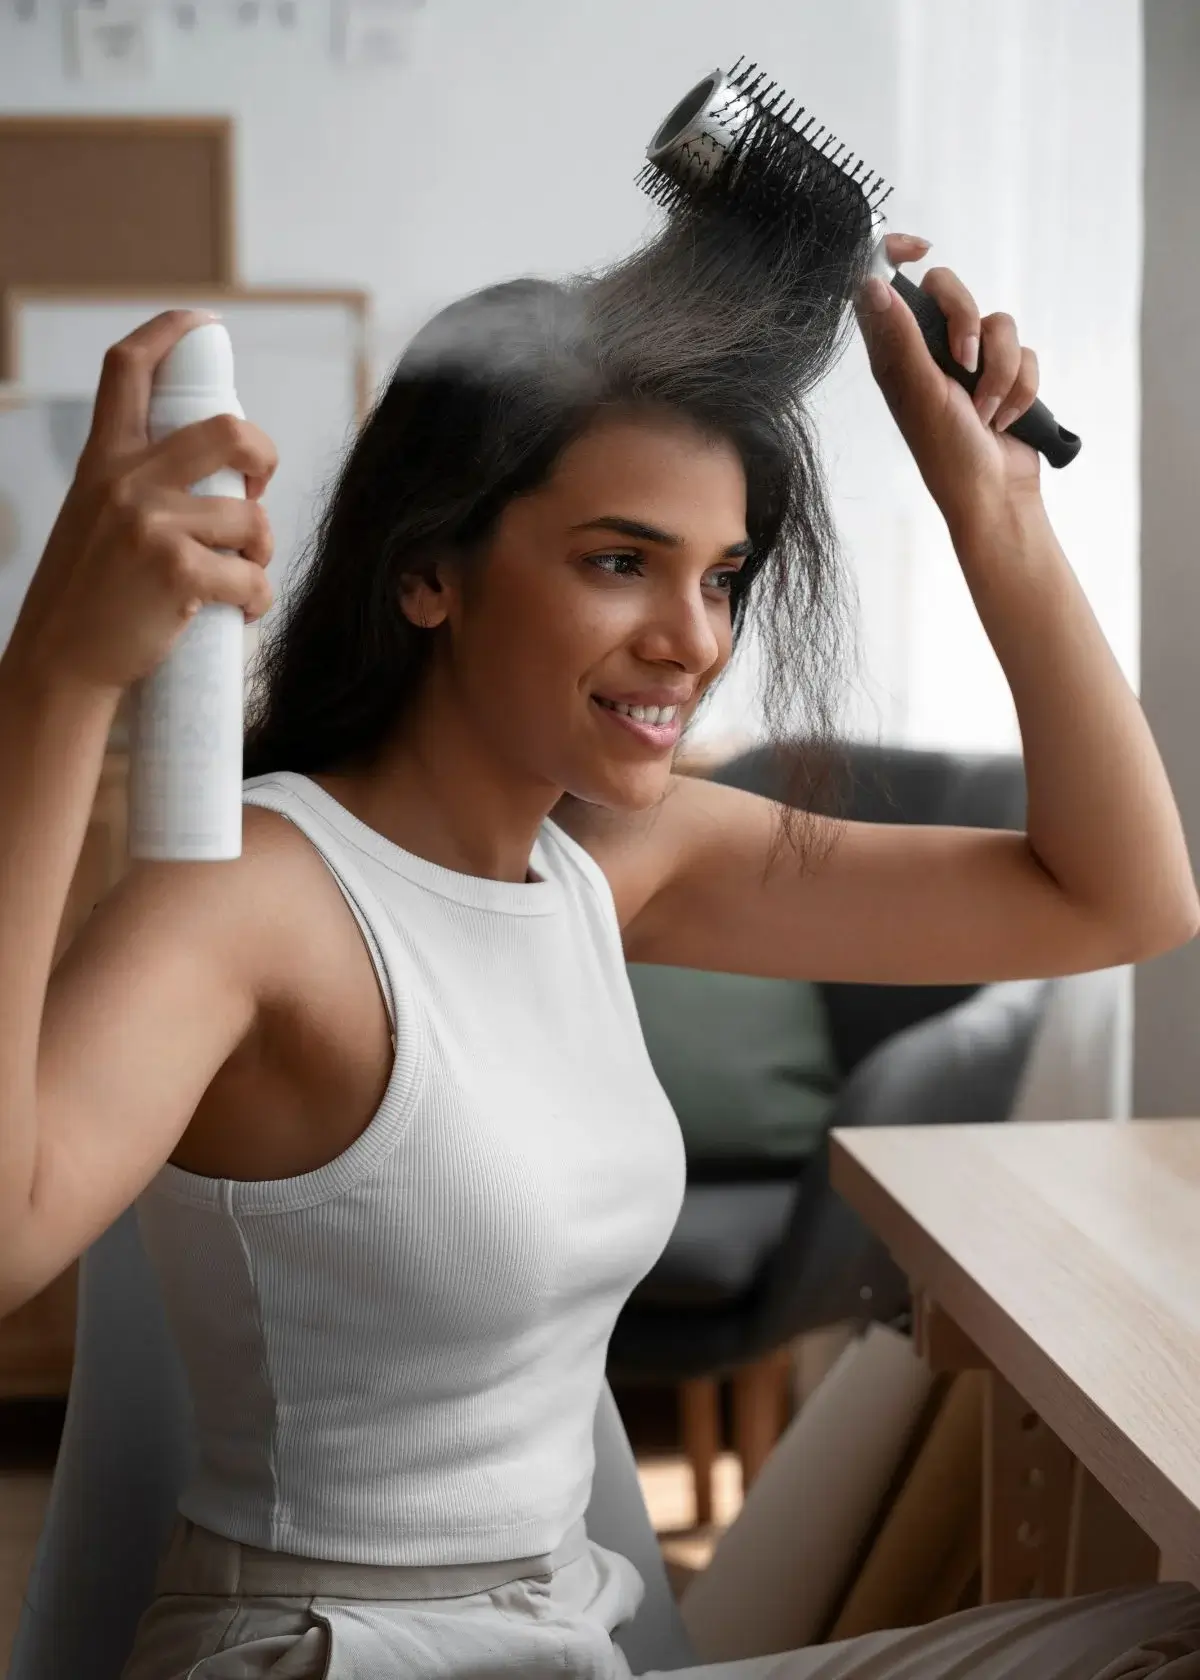 How to choose the right hair straightening spray?